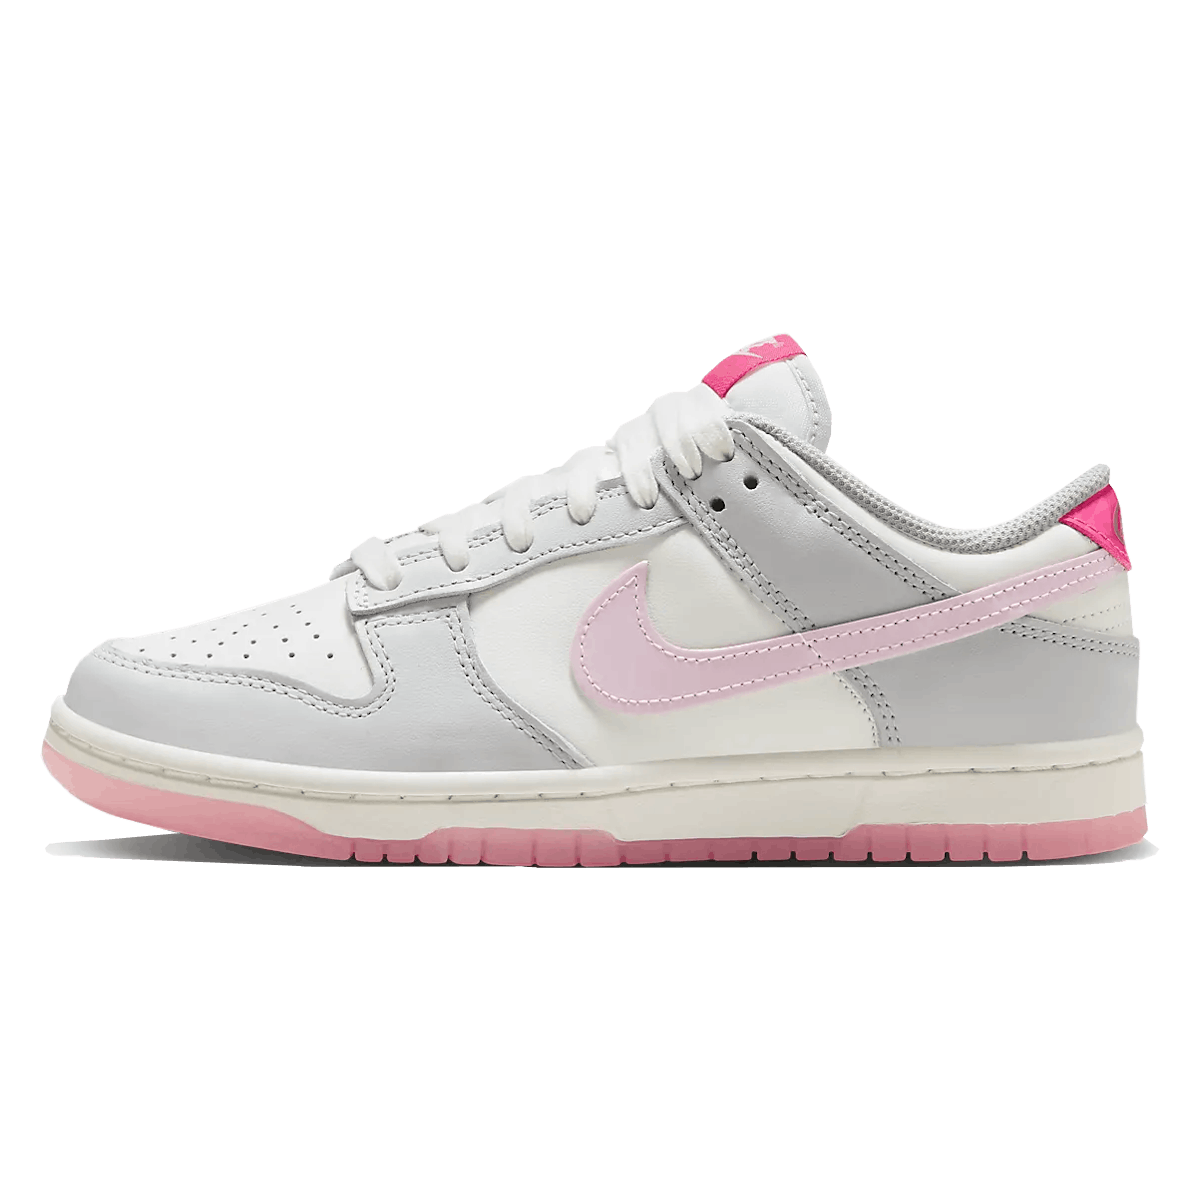 Nike Dunk Low Wmns "52"